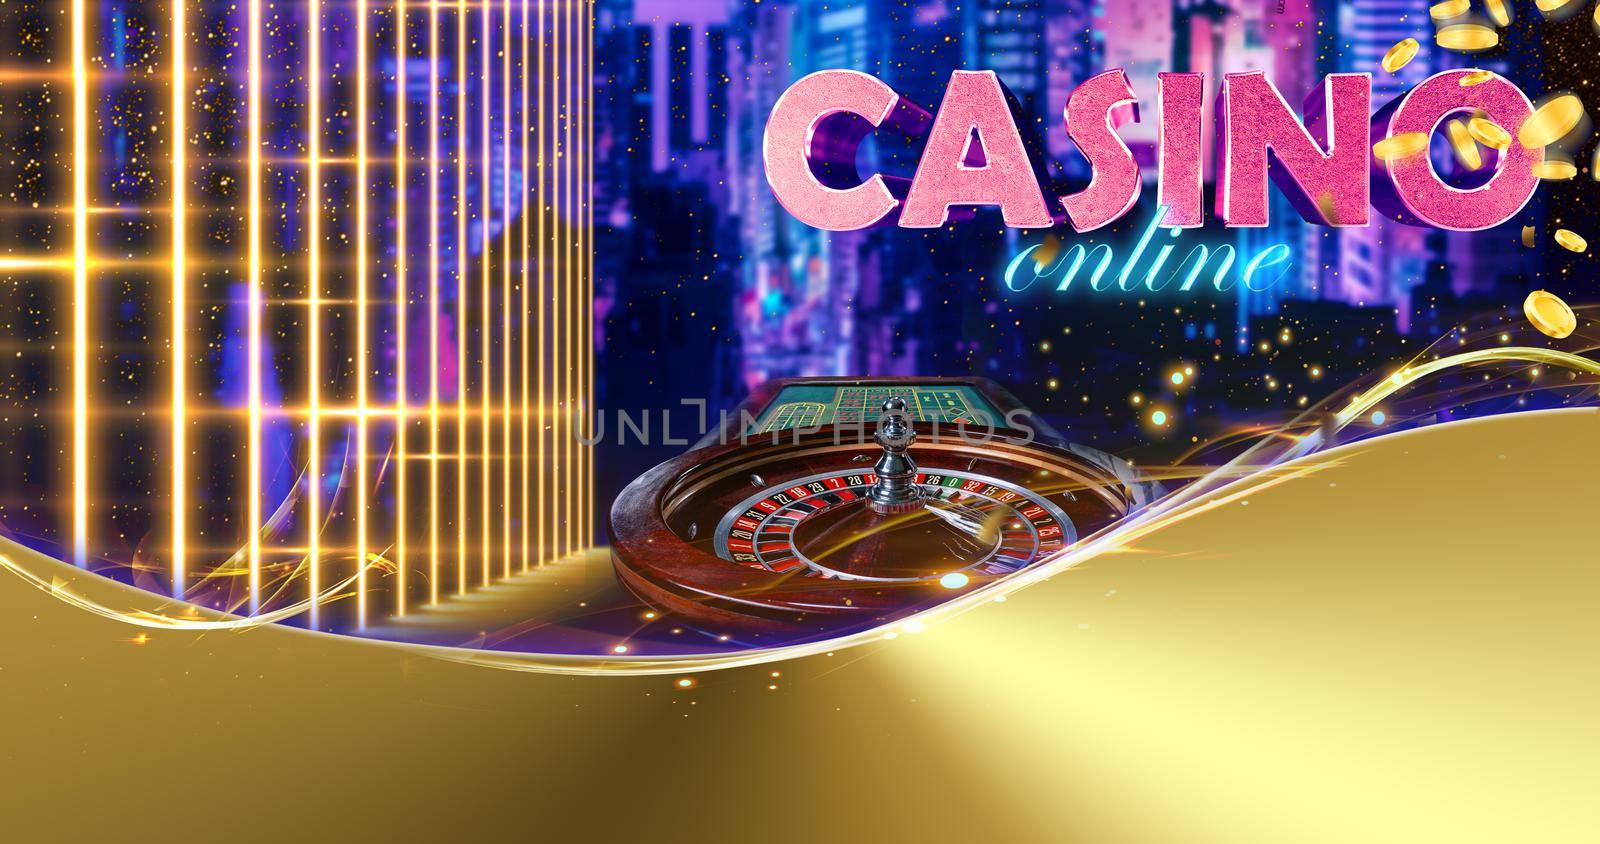 Roulette against cityscape sparkling background with neon lights and inscription casino online, falling golden coins. Copy space for your text. Poker by nazarovsergey